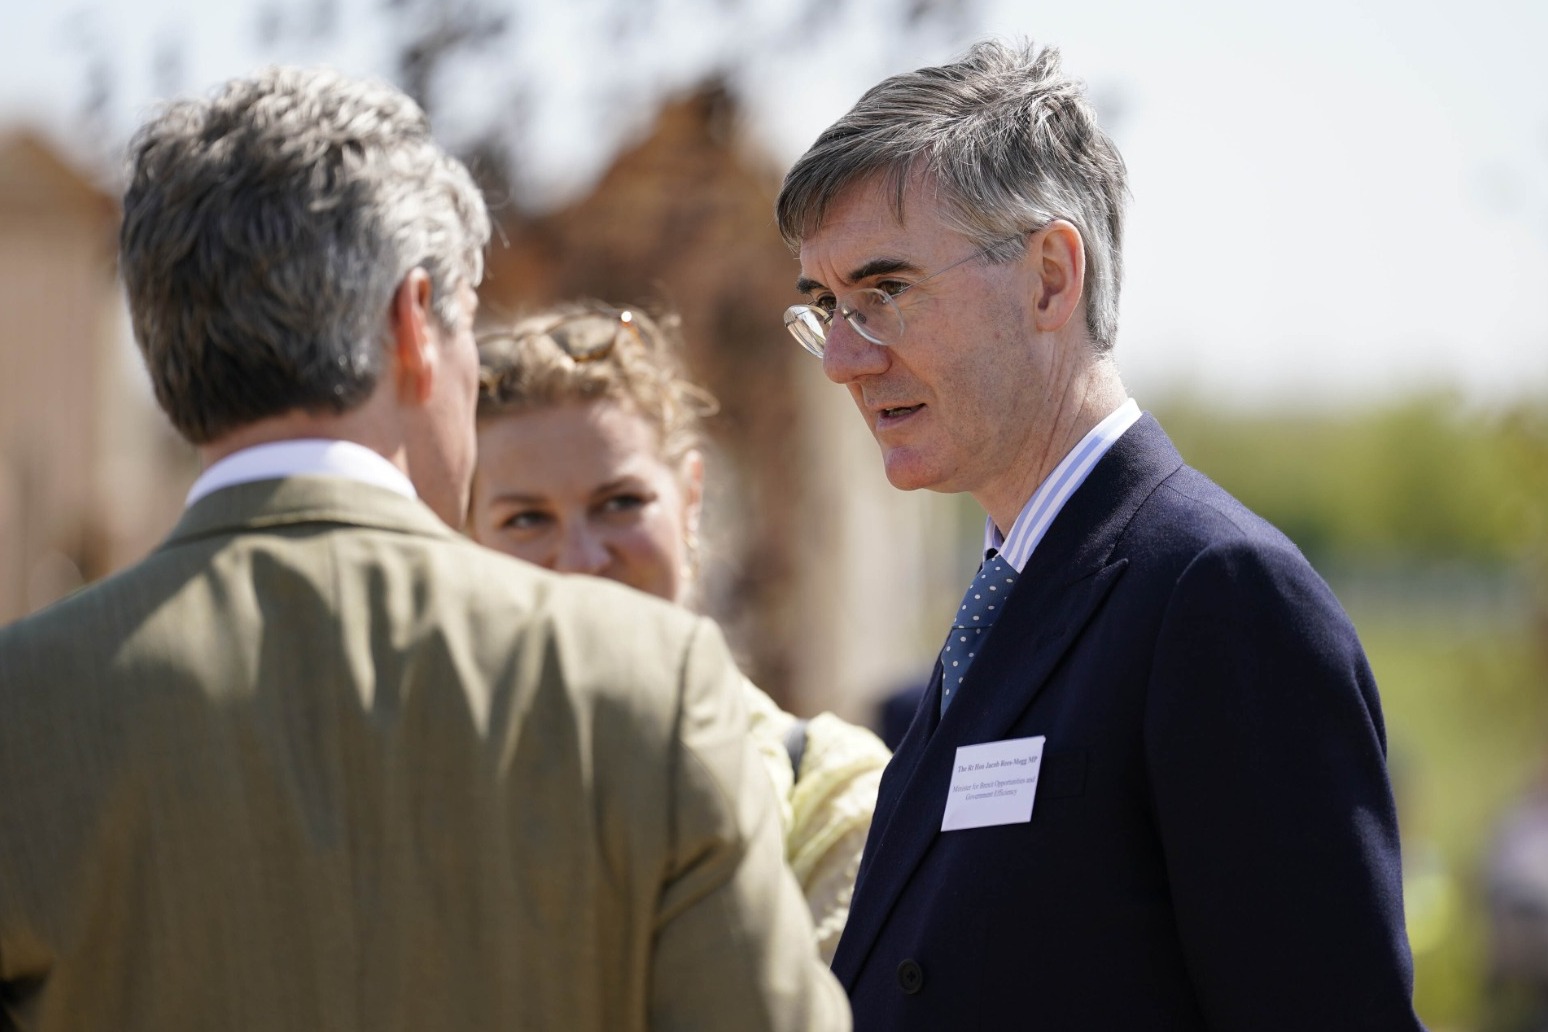 New law will free businesses from ‘straitjacket’ of EU rules, says Rees-Mogg 